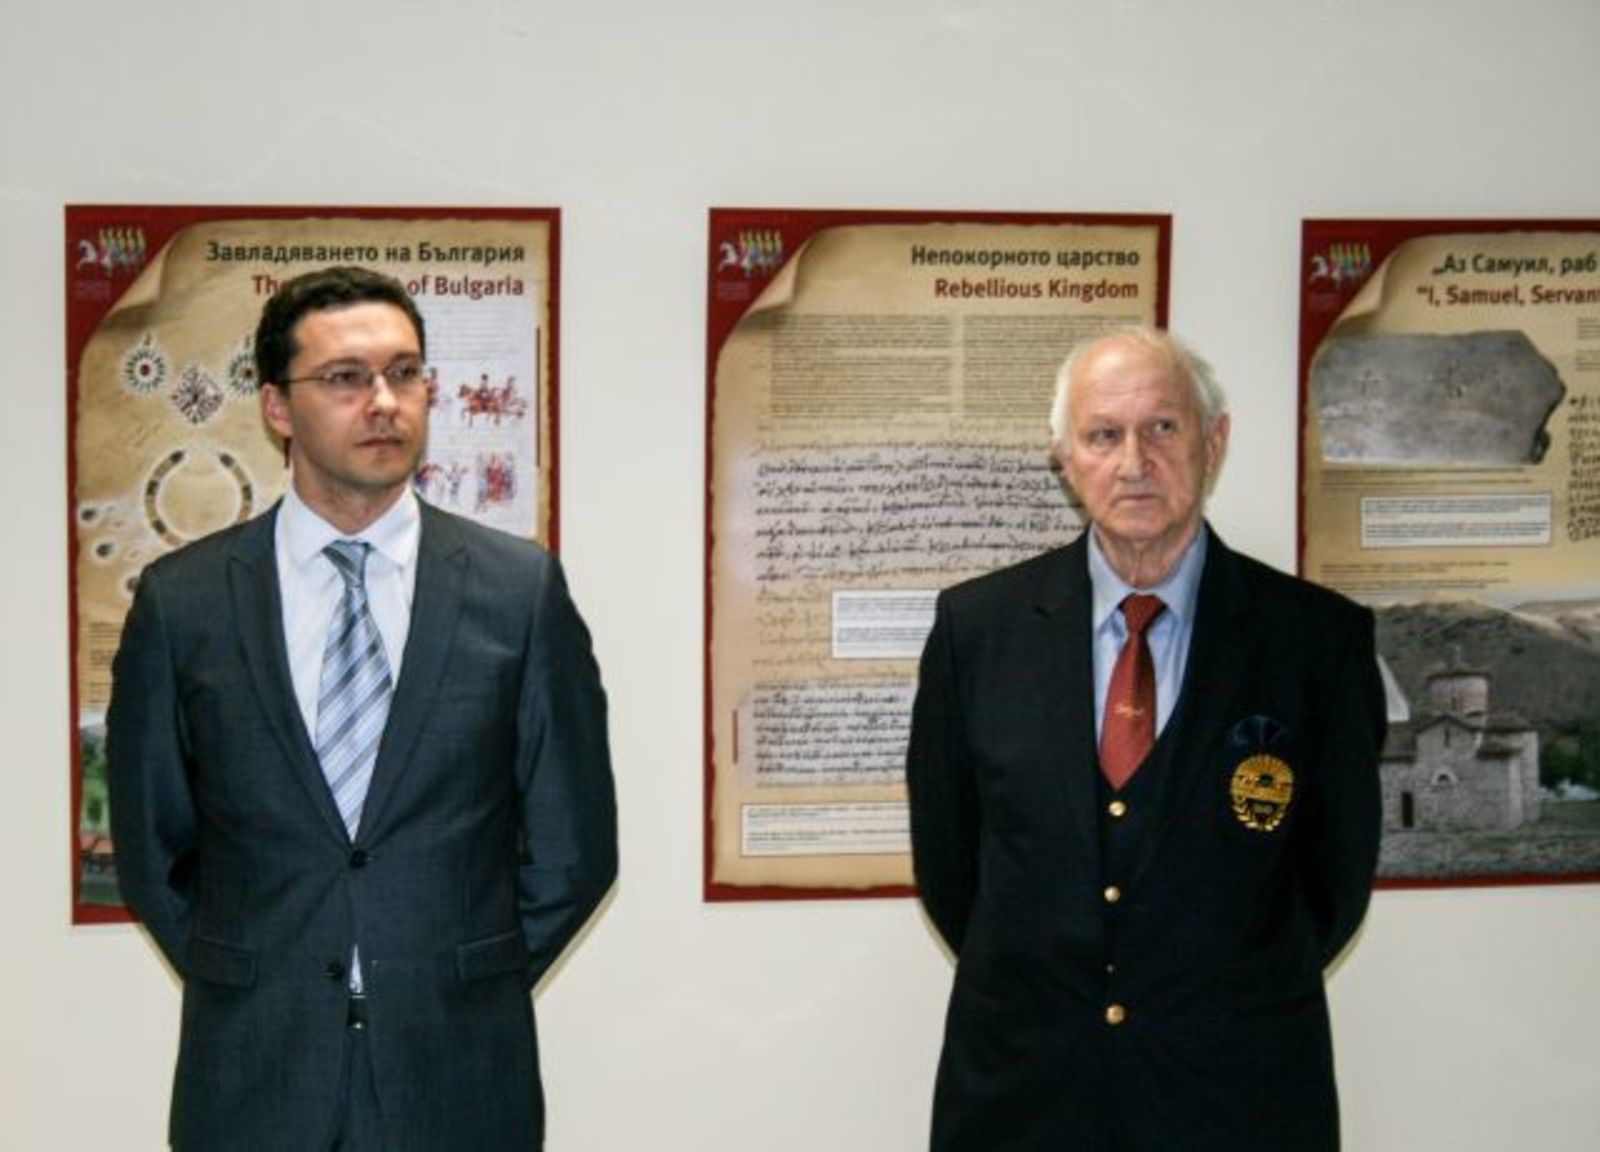 EXHIBITION DADICATED TO THE AGE OF TSAR SAMUEL WAS OPENED BY MINISTER DANIEL MITOV